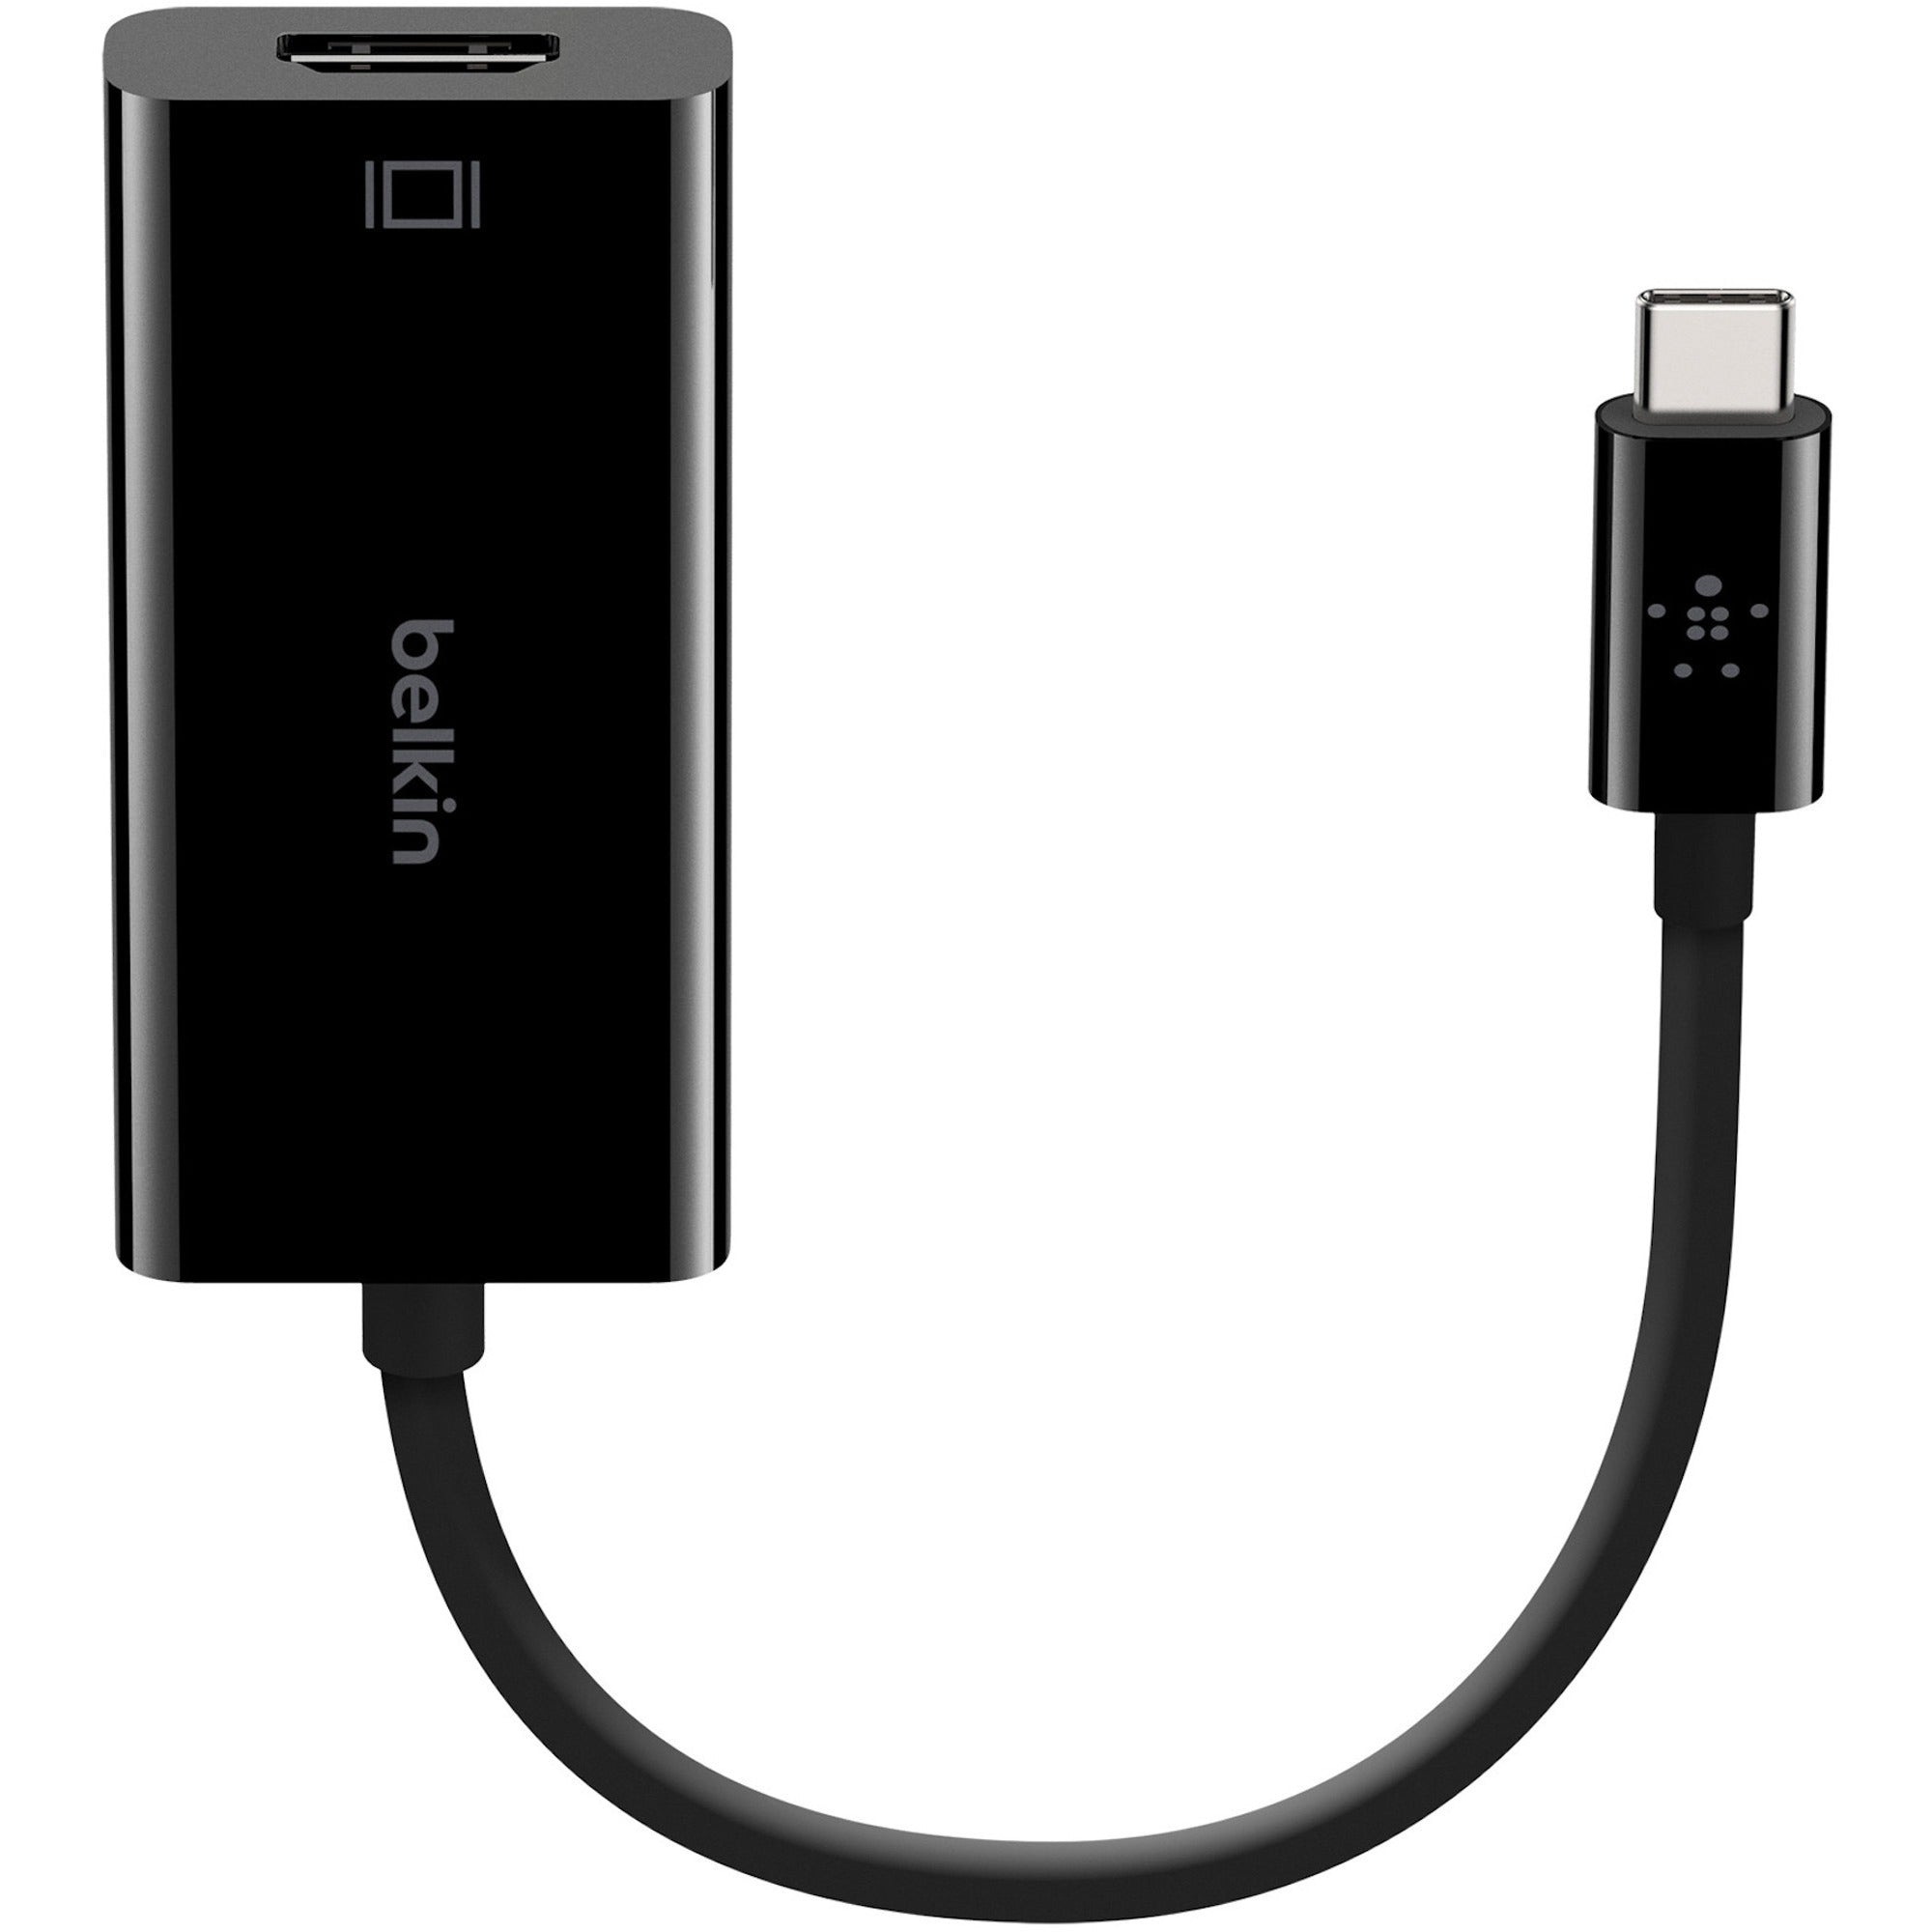 belkin-usb-c-to-hdmi-adapter-cable-4k-video-adapter-black-thunderbolt-3-displayport-1-pack-1-x-usb-type-c-male-1-x-hdmi-hdmi-20-female-4096-x-2160-supported-black_blkb2b144blk - 1